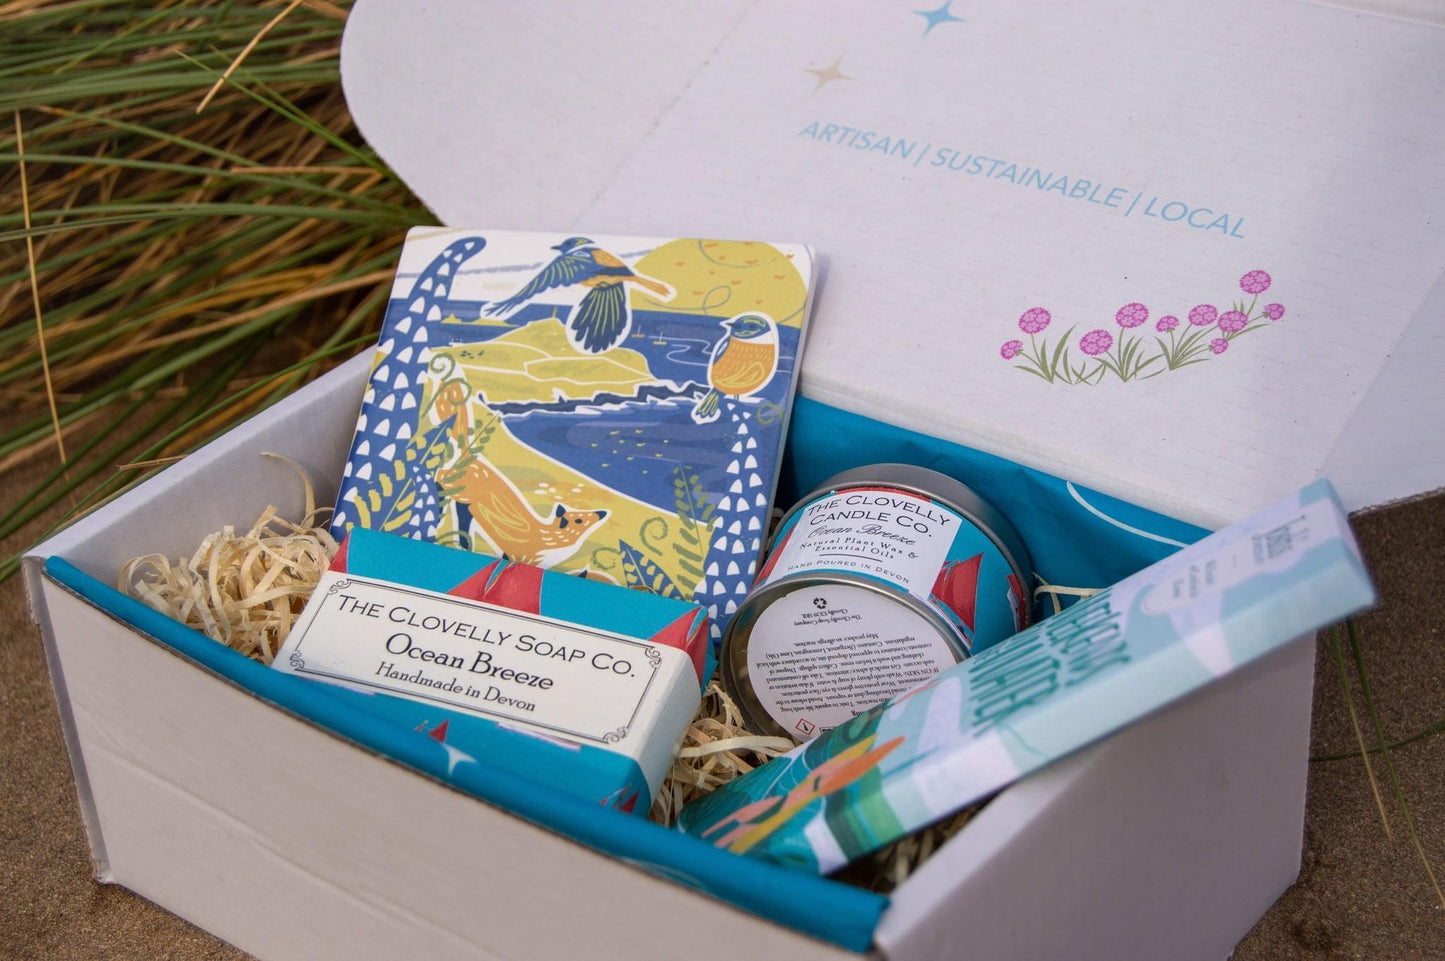 Sand and Sparkles Coastal Vibes Gift Box with Cornish illustrated coaster, Cornish chocolate, Devon handmade soap and candle